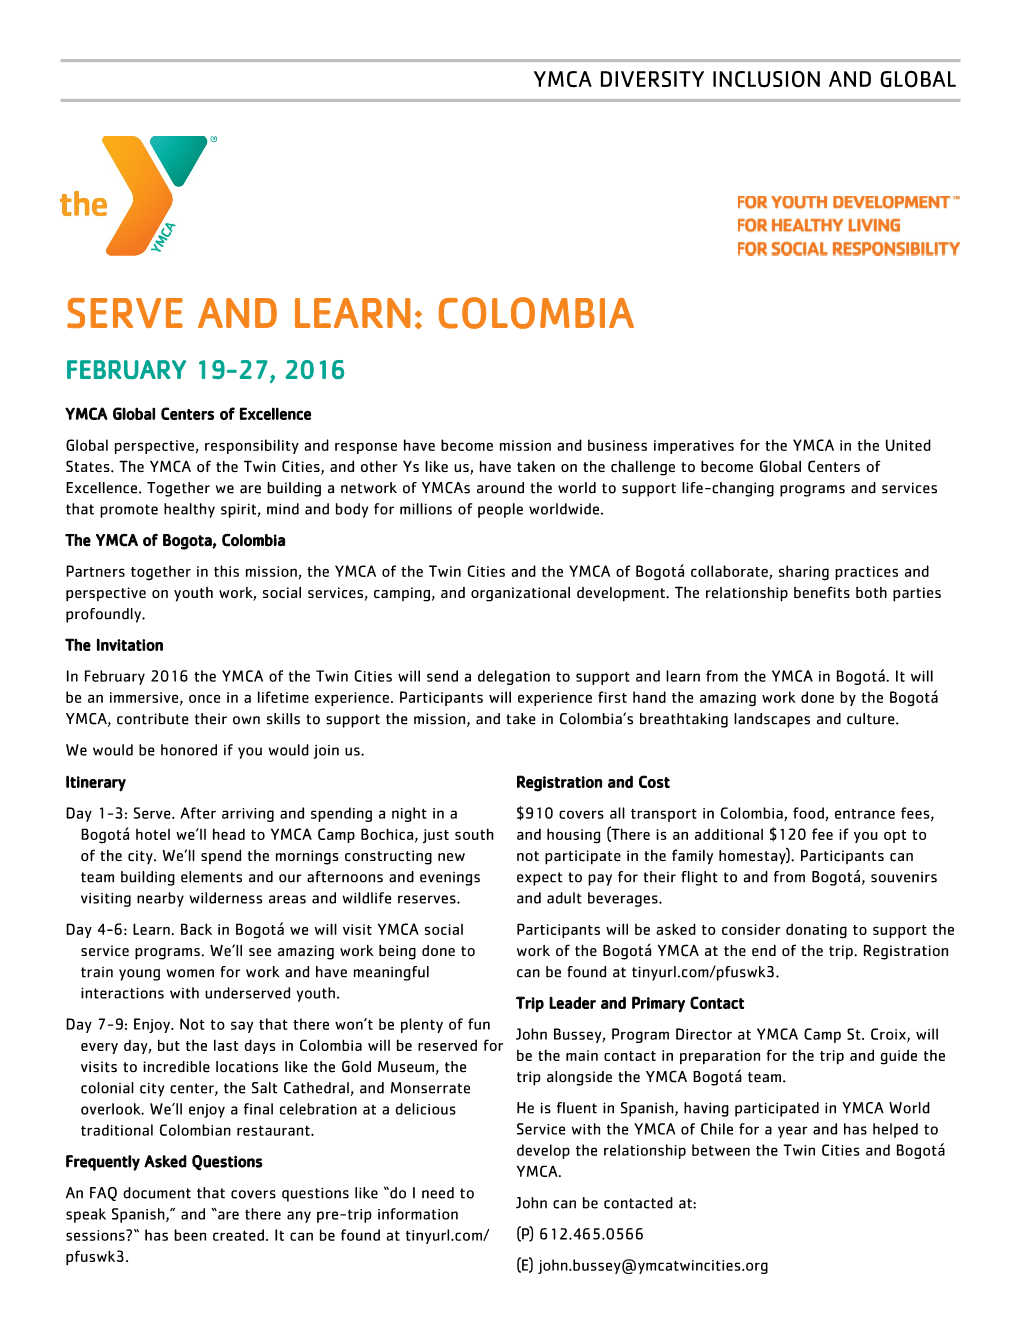 Serve and Learn: Colombia February 19-27, 2016